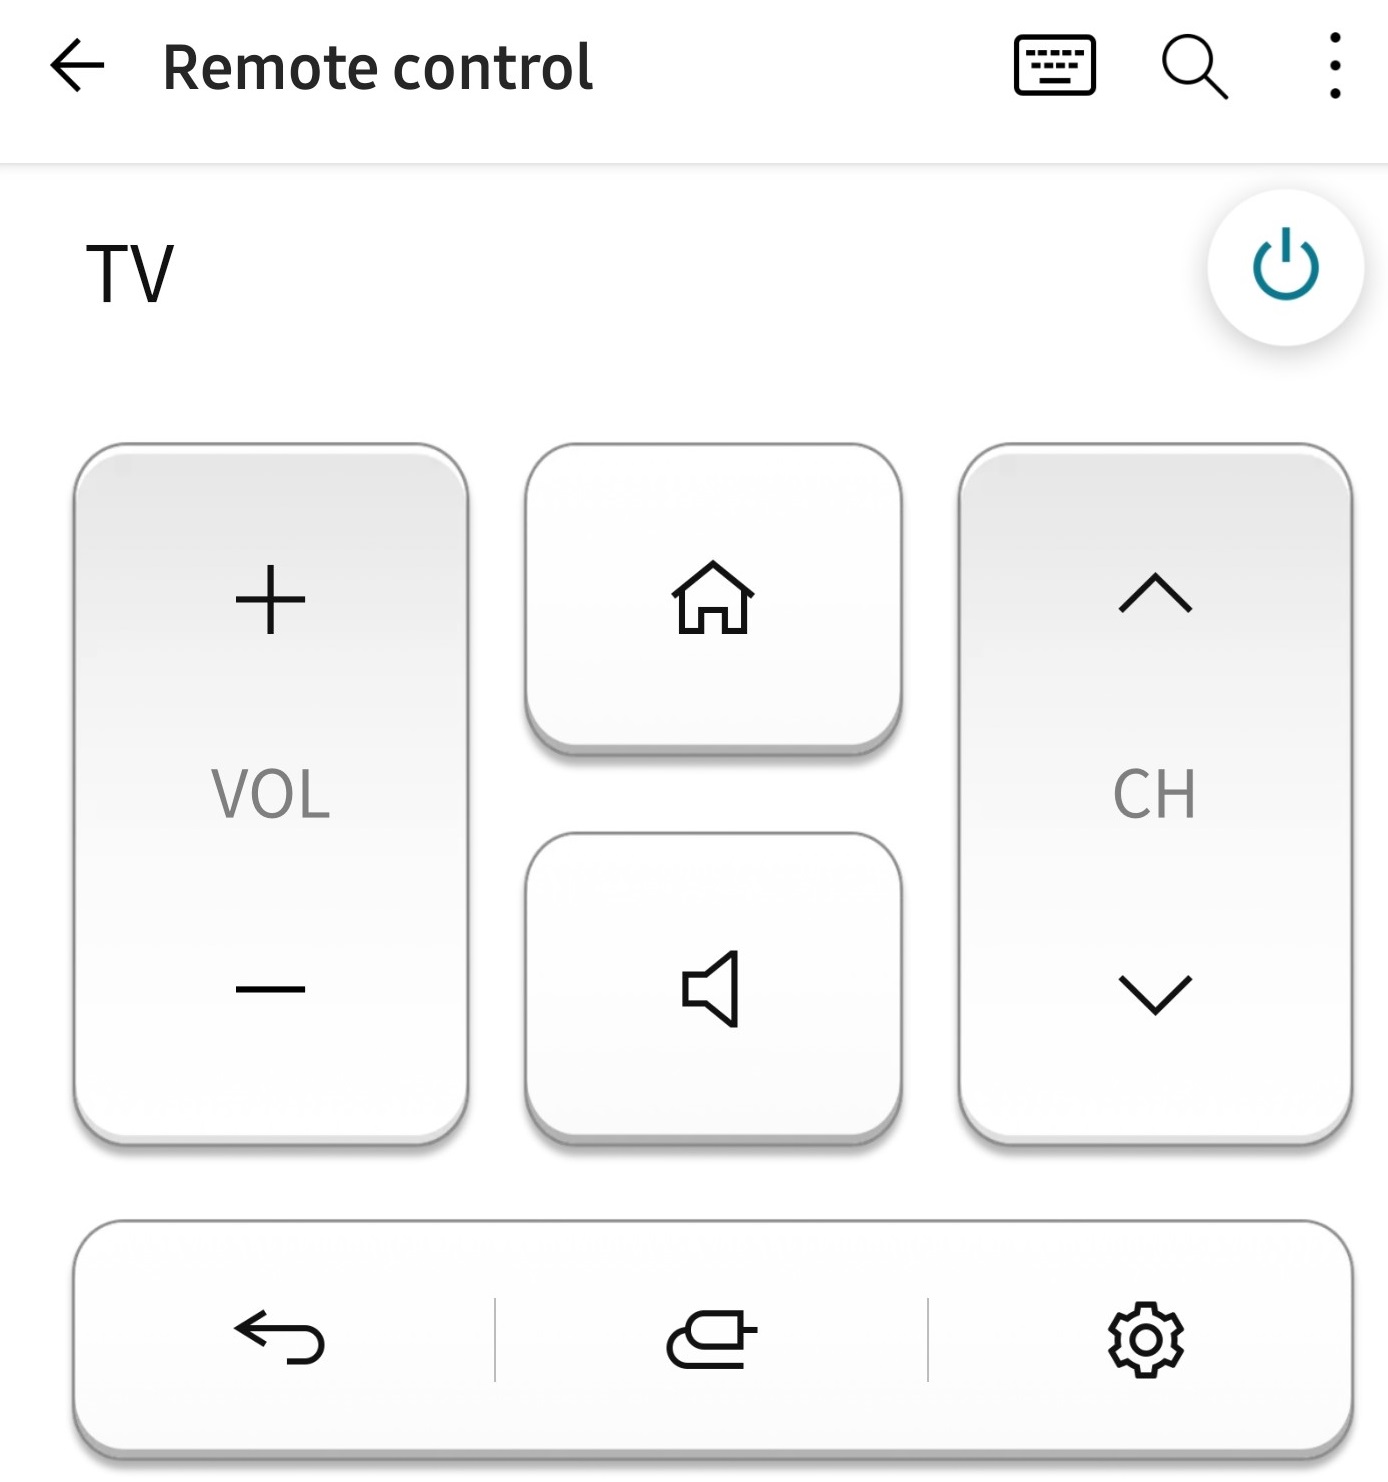 Use the remote control in the LG ThinQ app